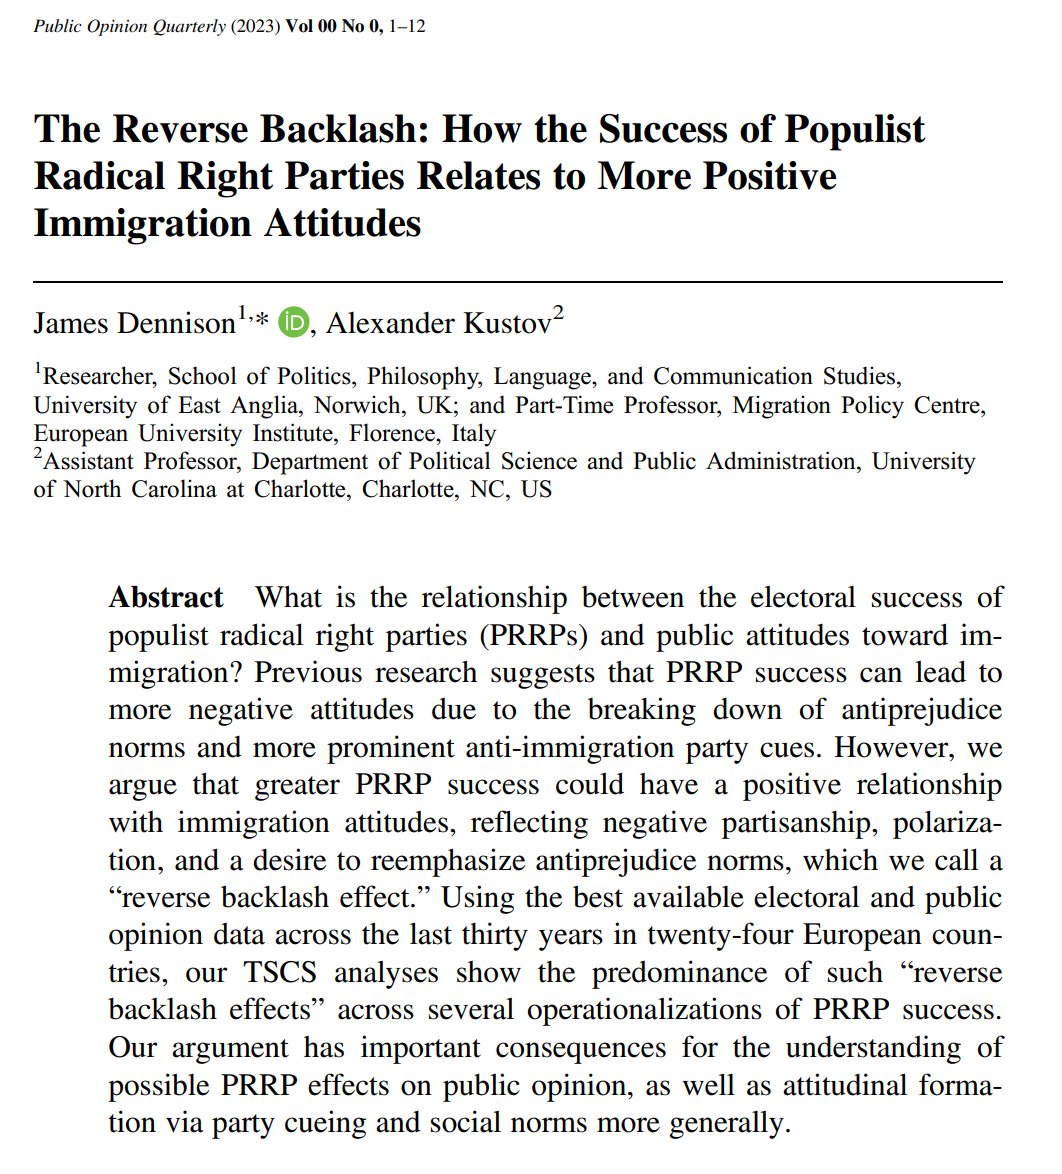 We've all heard about 'immigration backlash.' But what happens to immigration attitudes when populists win? Reverse backlash! Our new study finds that public opinion is usually more pro-immigration *after* the electoral success of anti-immigration parties doi.org/10.1093/poq/nf…